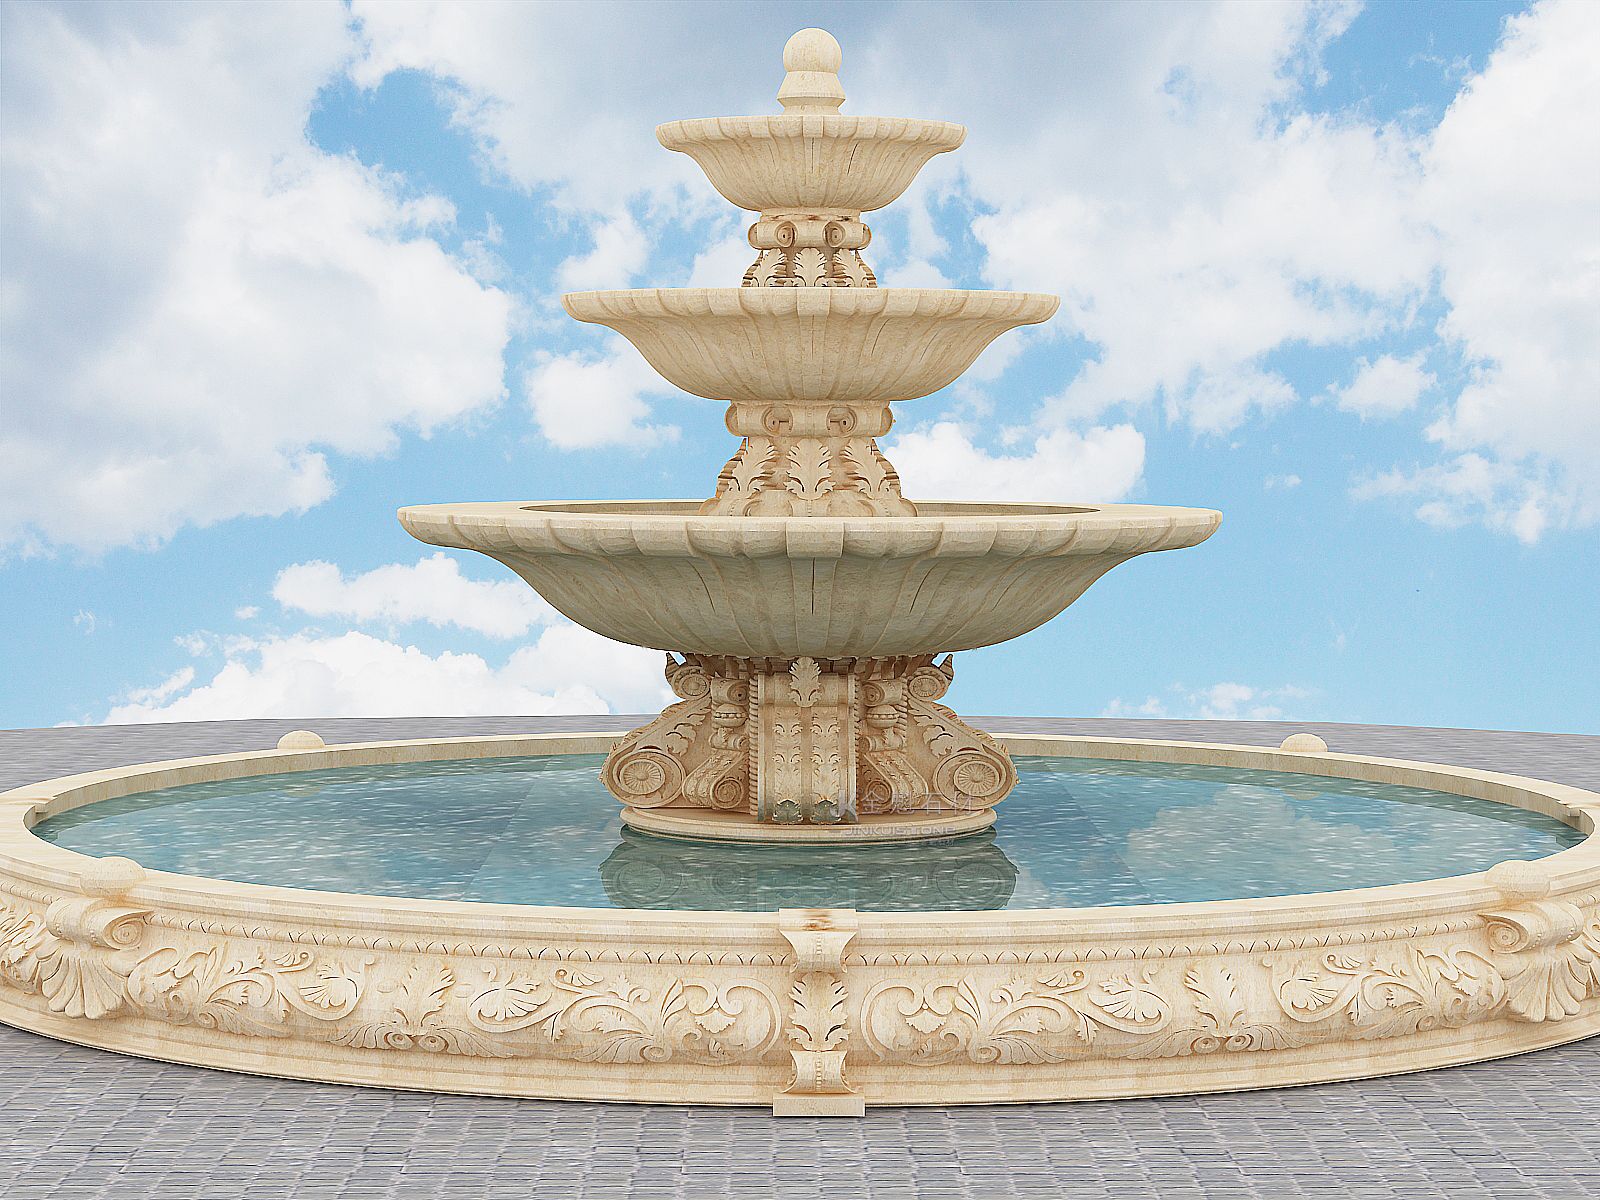 Factory Sold Directly Simple Multi-layer Marble Fountain